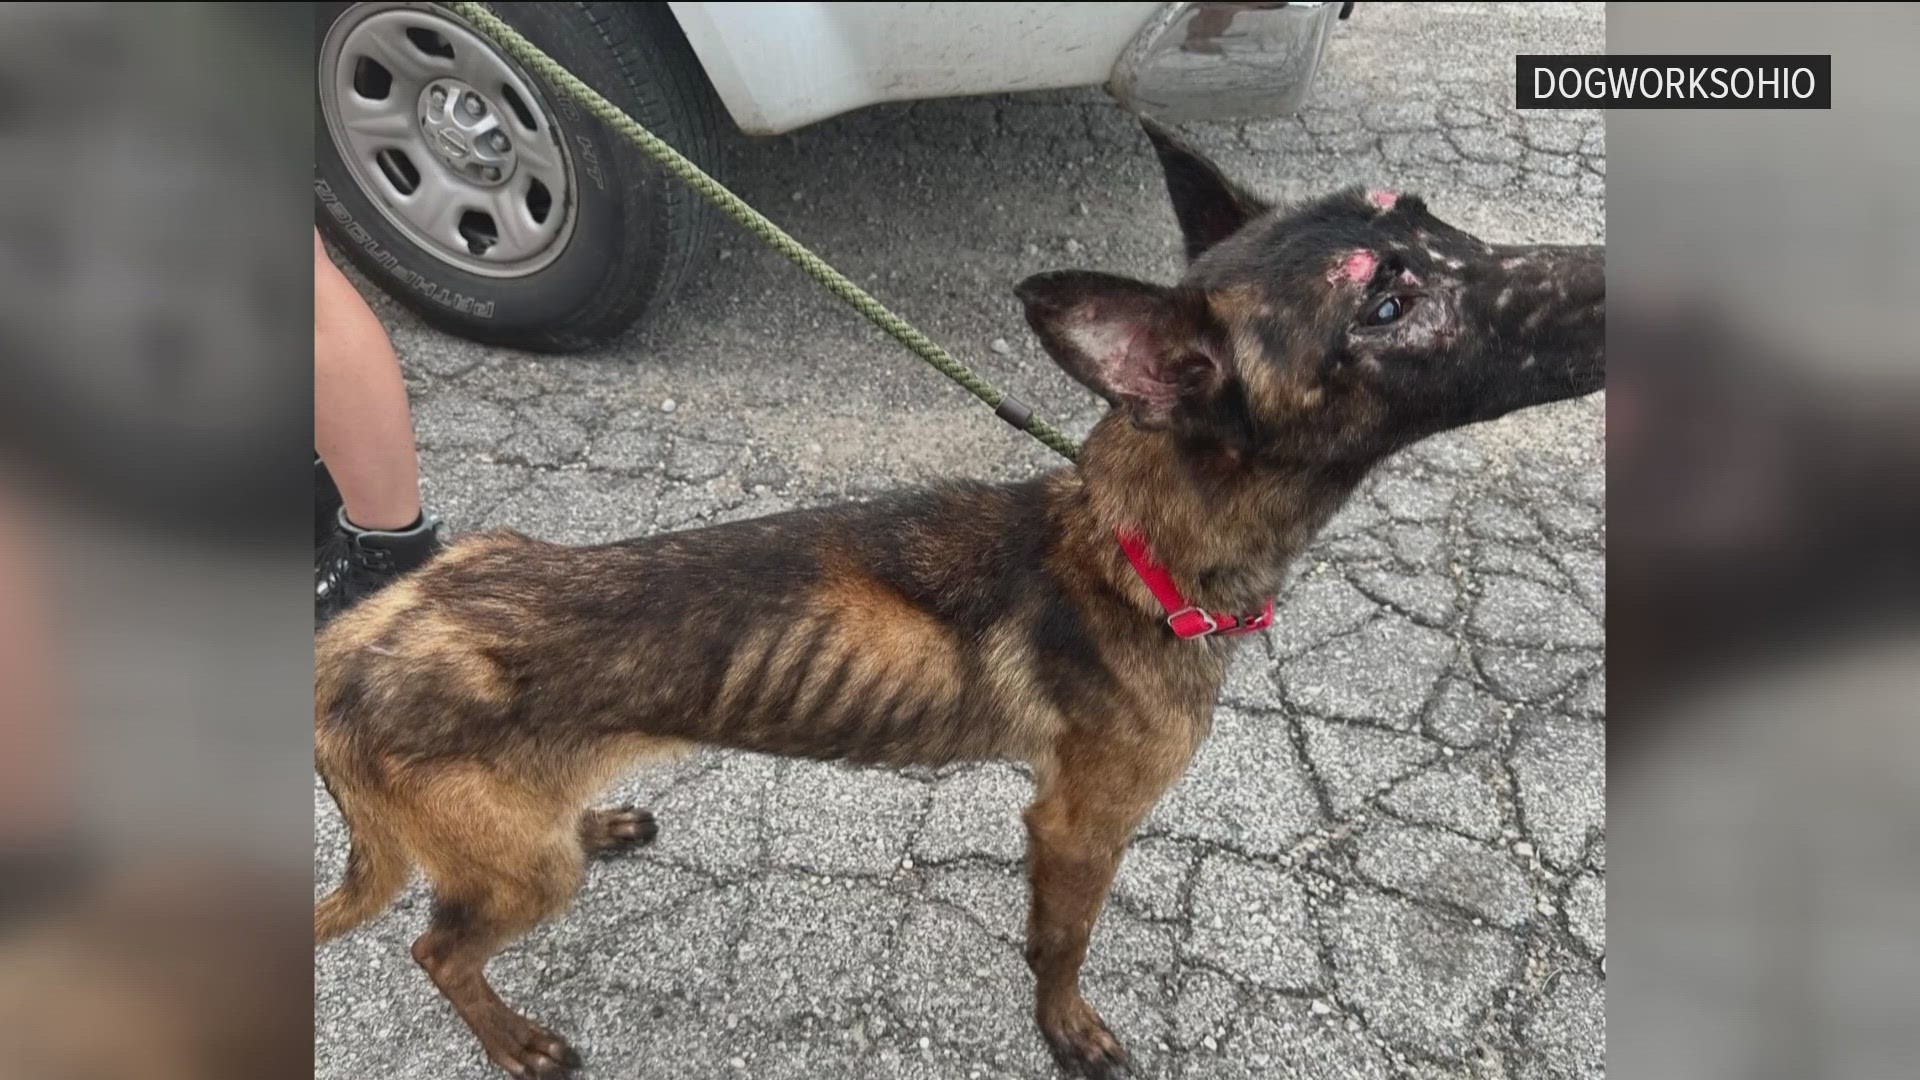 Dogworks Ohio believes the Belgian Malinois, Waffles, was a victim of animal cruelty.